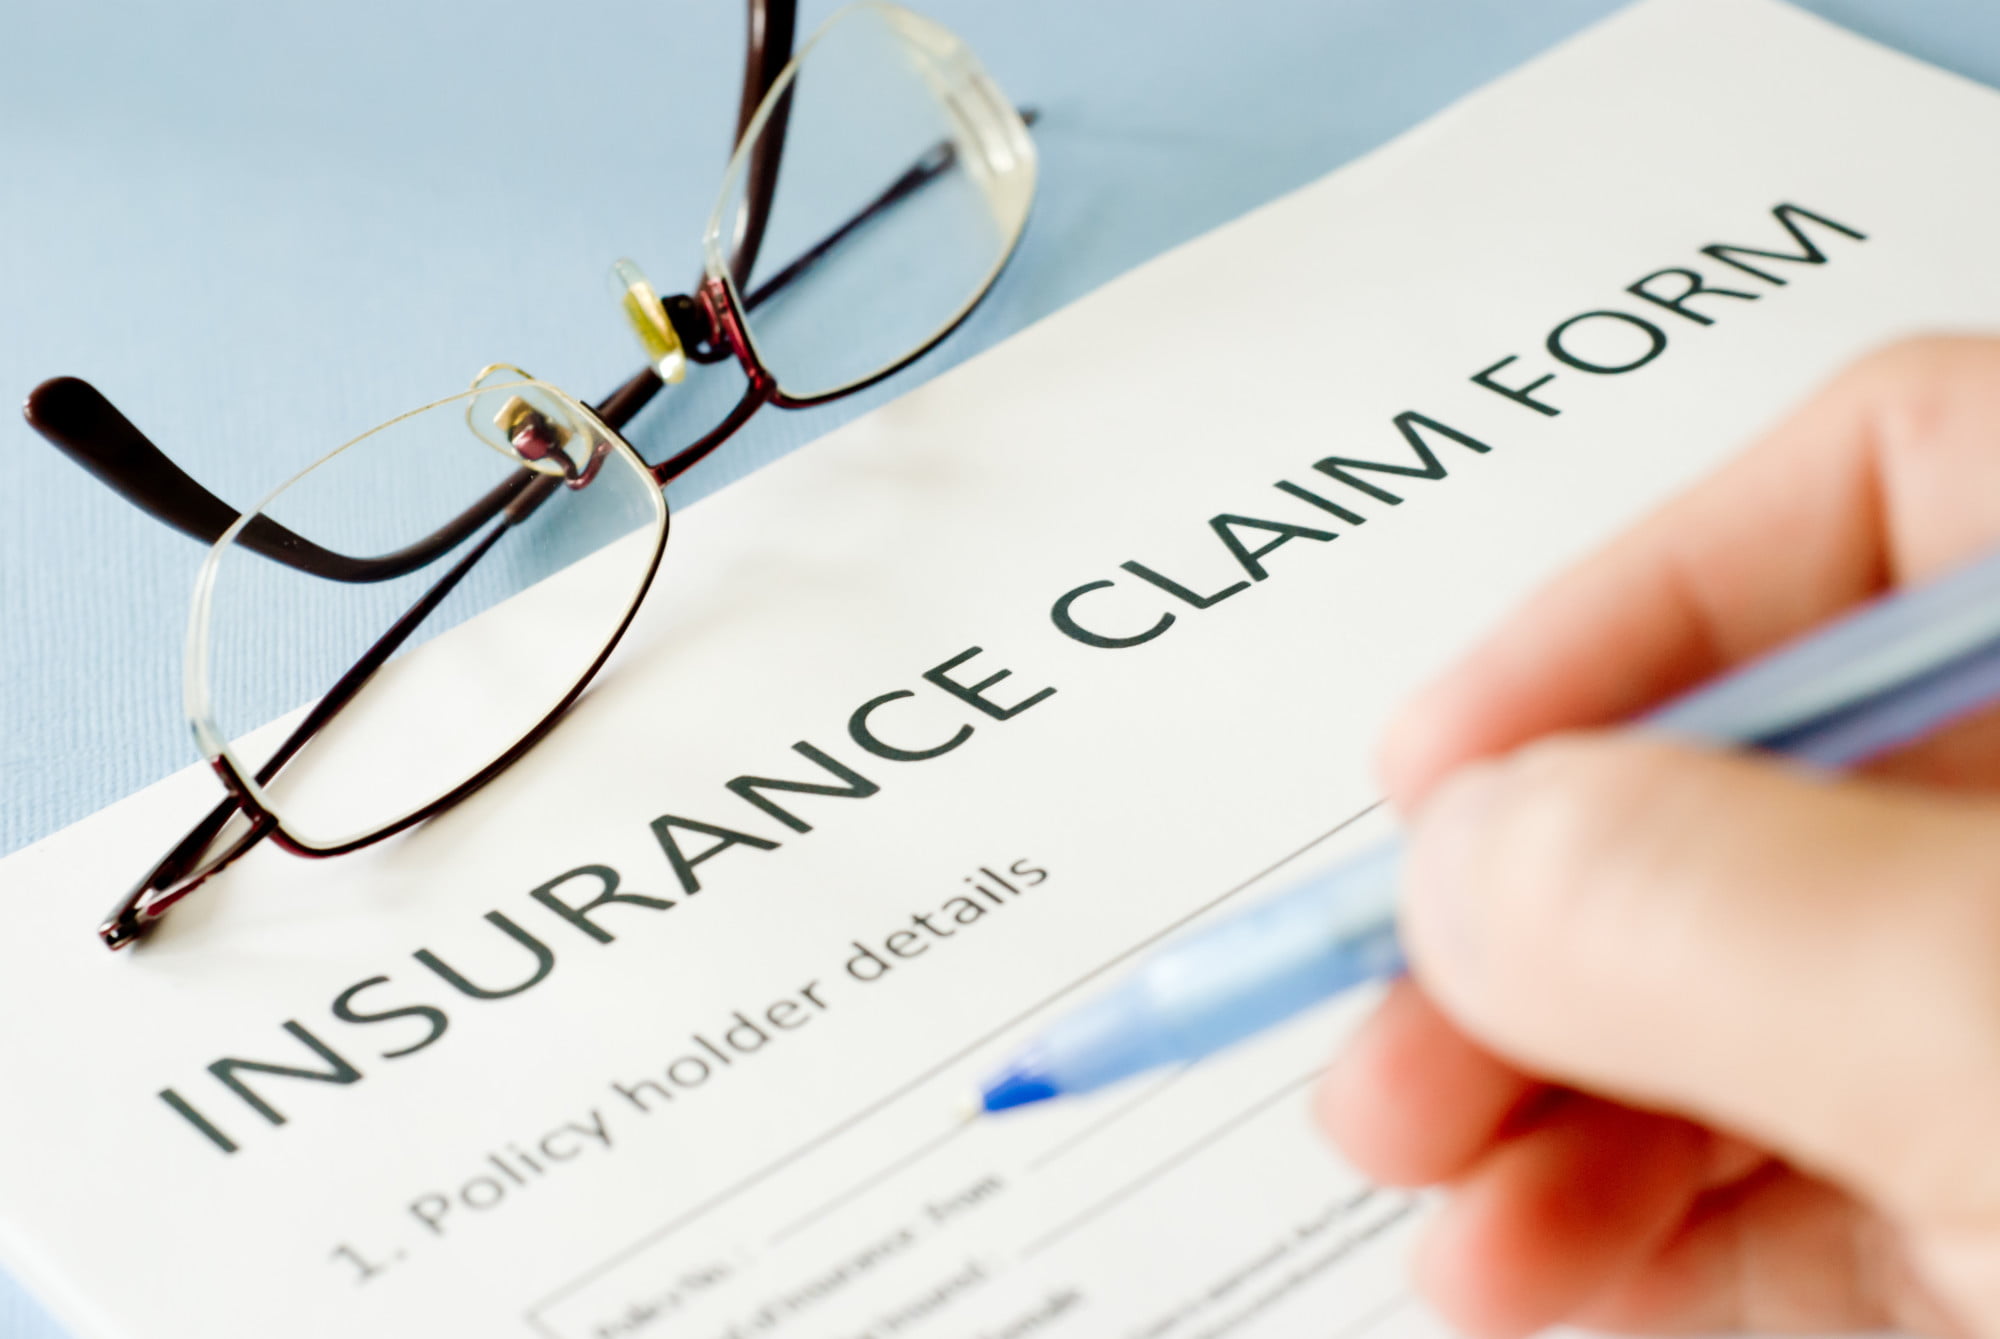 Filing an insurance claim for a car accident properly requires knowing what not to do. Here are car insurance claim mistakes and how to avoid them.